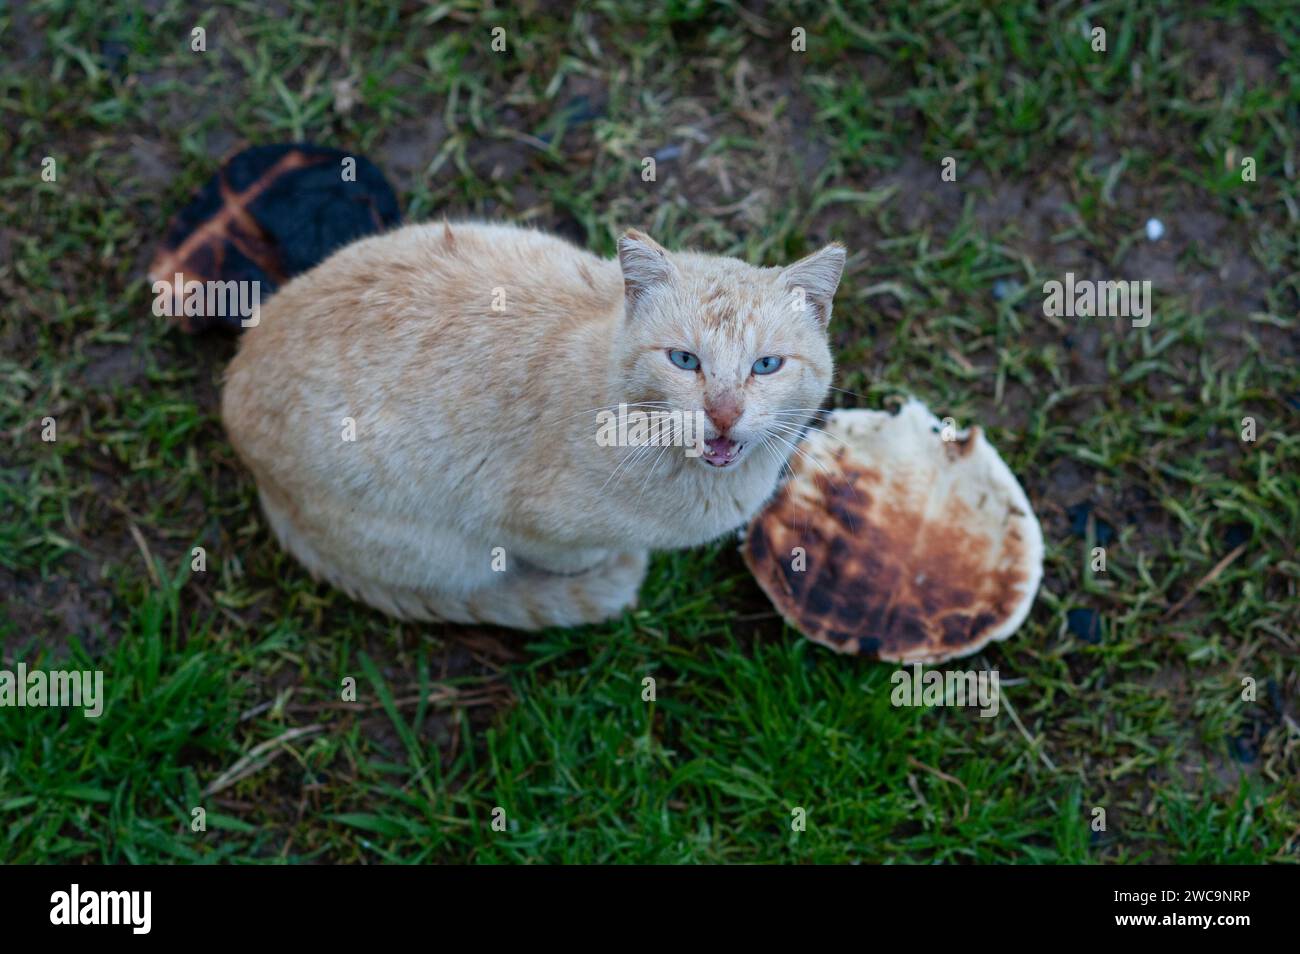 Cream colored, isolated, adult feral cat with large blue eyes stands guard and cries meow over discarded, burned pita bread. Stock Photo